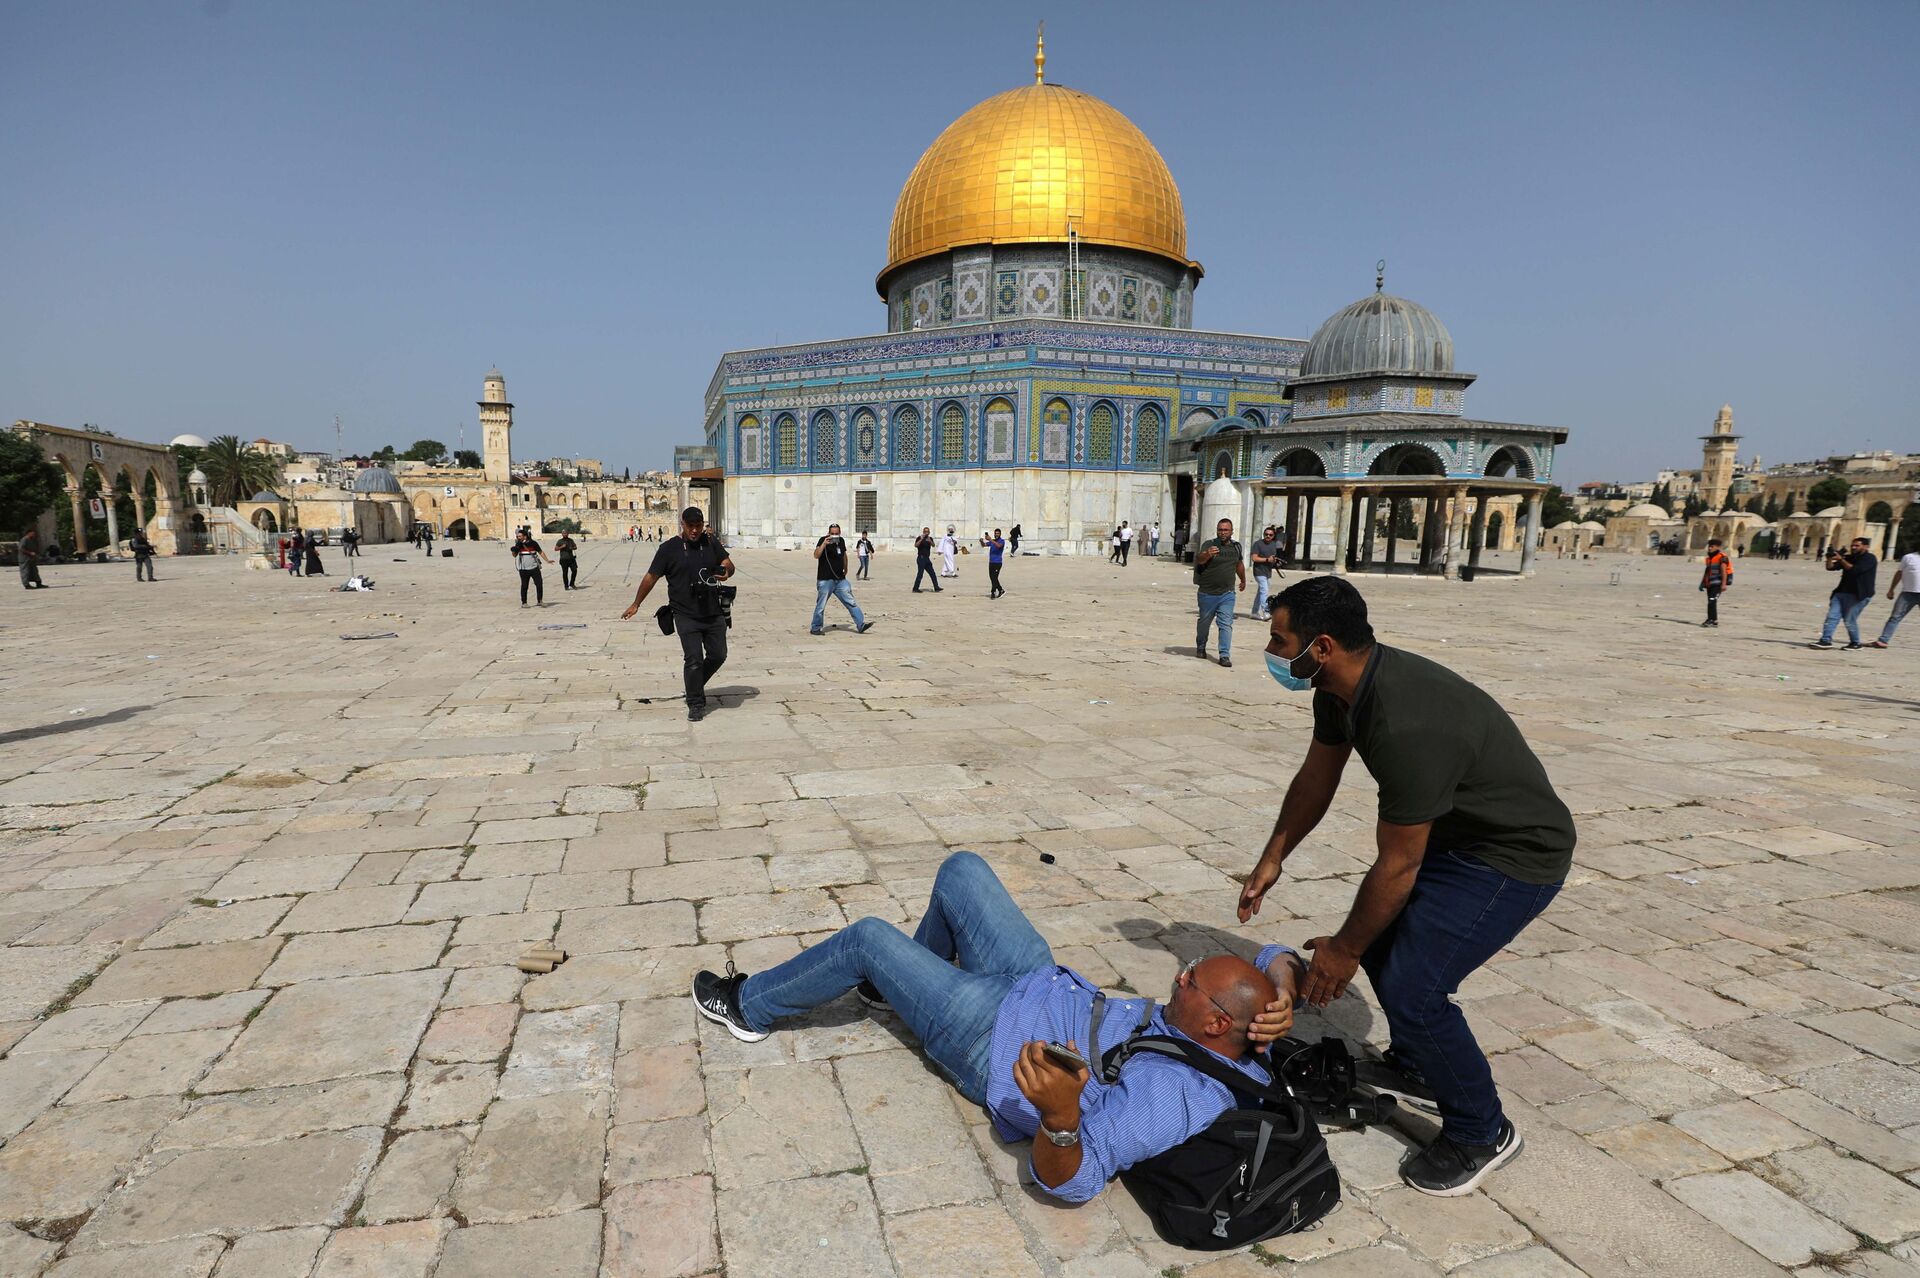 A cameraman is helped by a Palestinian after falling on the ground during clashes with Israeli police at the compound that houses Al-Aqsa Mosque, known to Muslims as Noble Sanctuary and to Jews as Temple Mount, in Jerusalem's Old City, May 10, 2021.  - Sputnik International, 1920, 07.09.2021